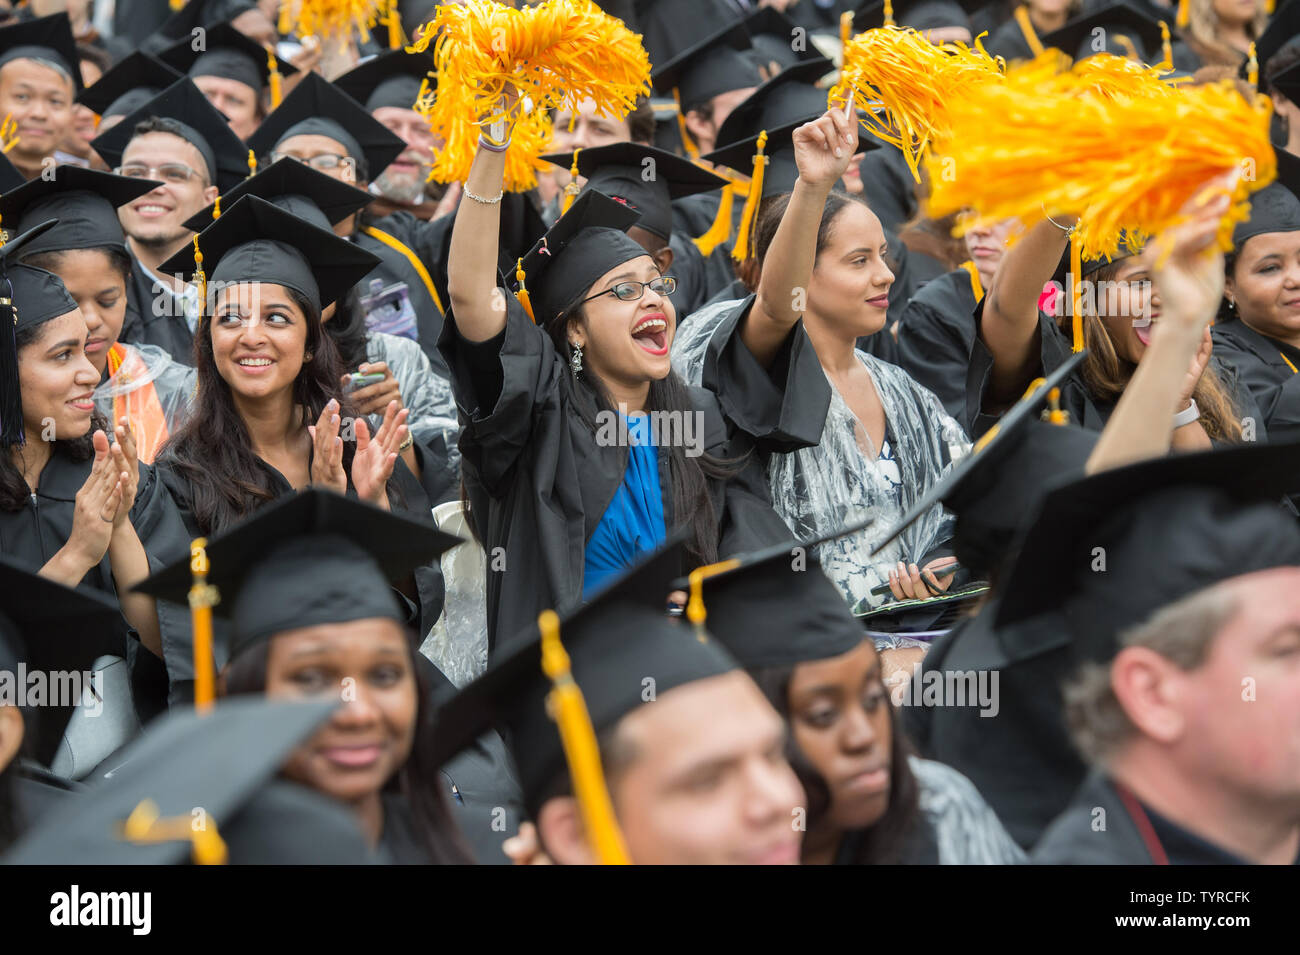 Students celebrate before First Lady Michelle Obama delivers her final commencement address as First Lady at the 170th Commencement Ceremony of The City College of New York on the CCNY campus in historic Harlem, Friday, June 3, 2016. More than 3,000 students make up the Class of 2016.  Photo by Bryan R. Smith/UPI Stock Photo